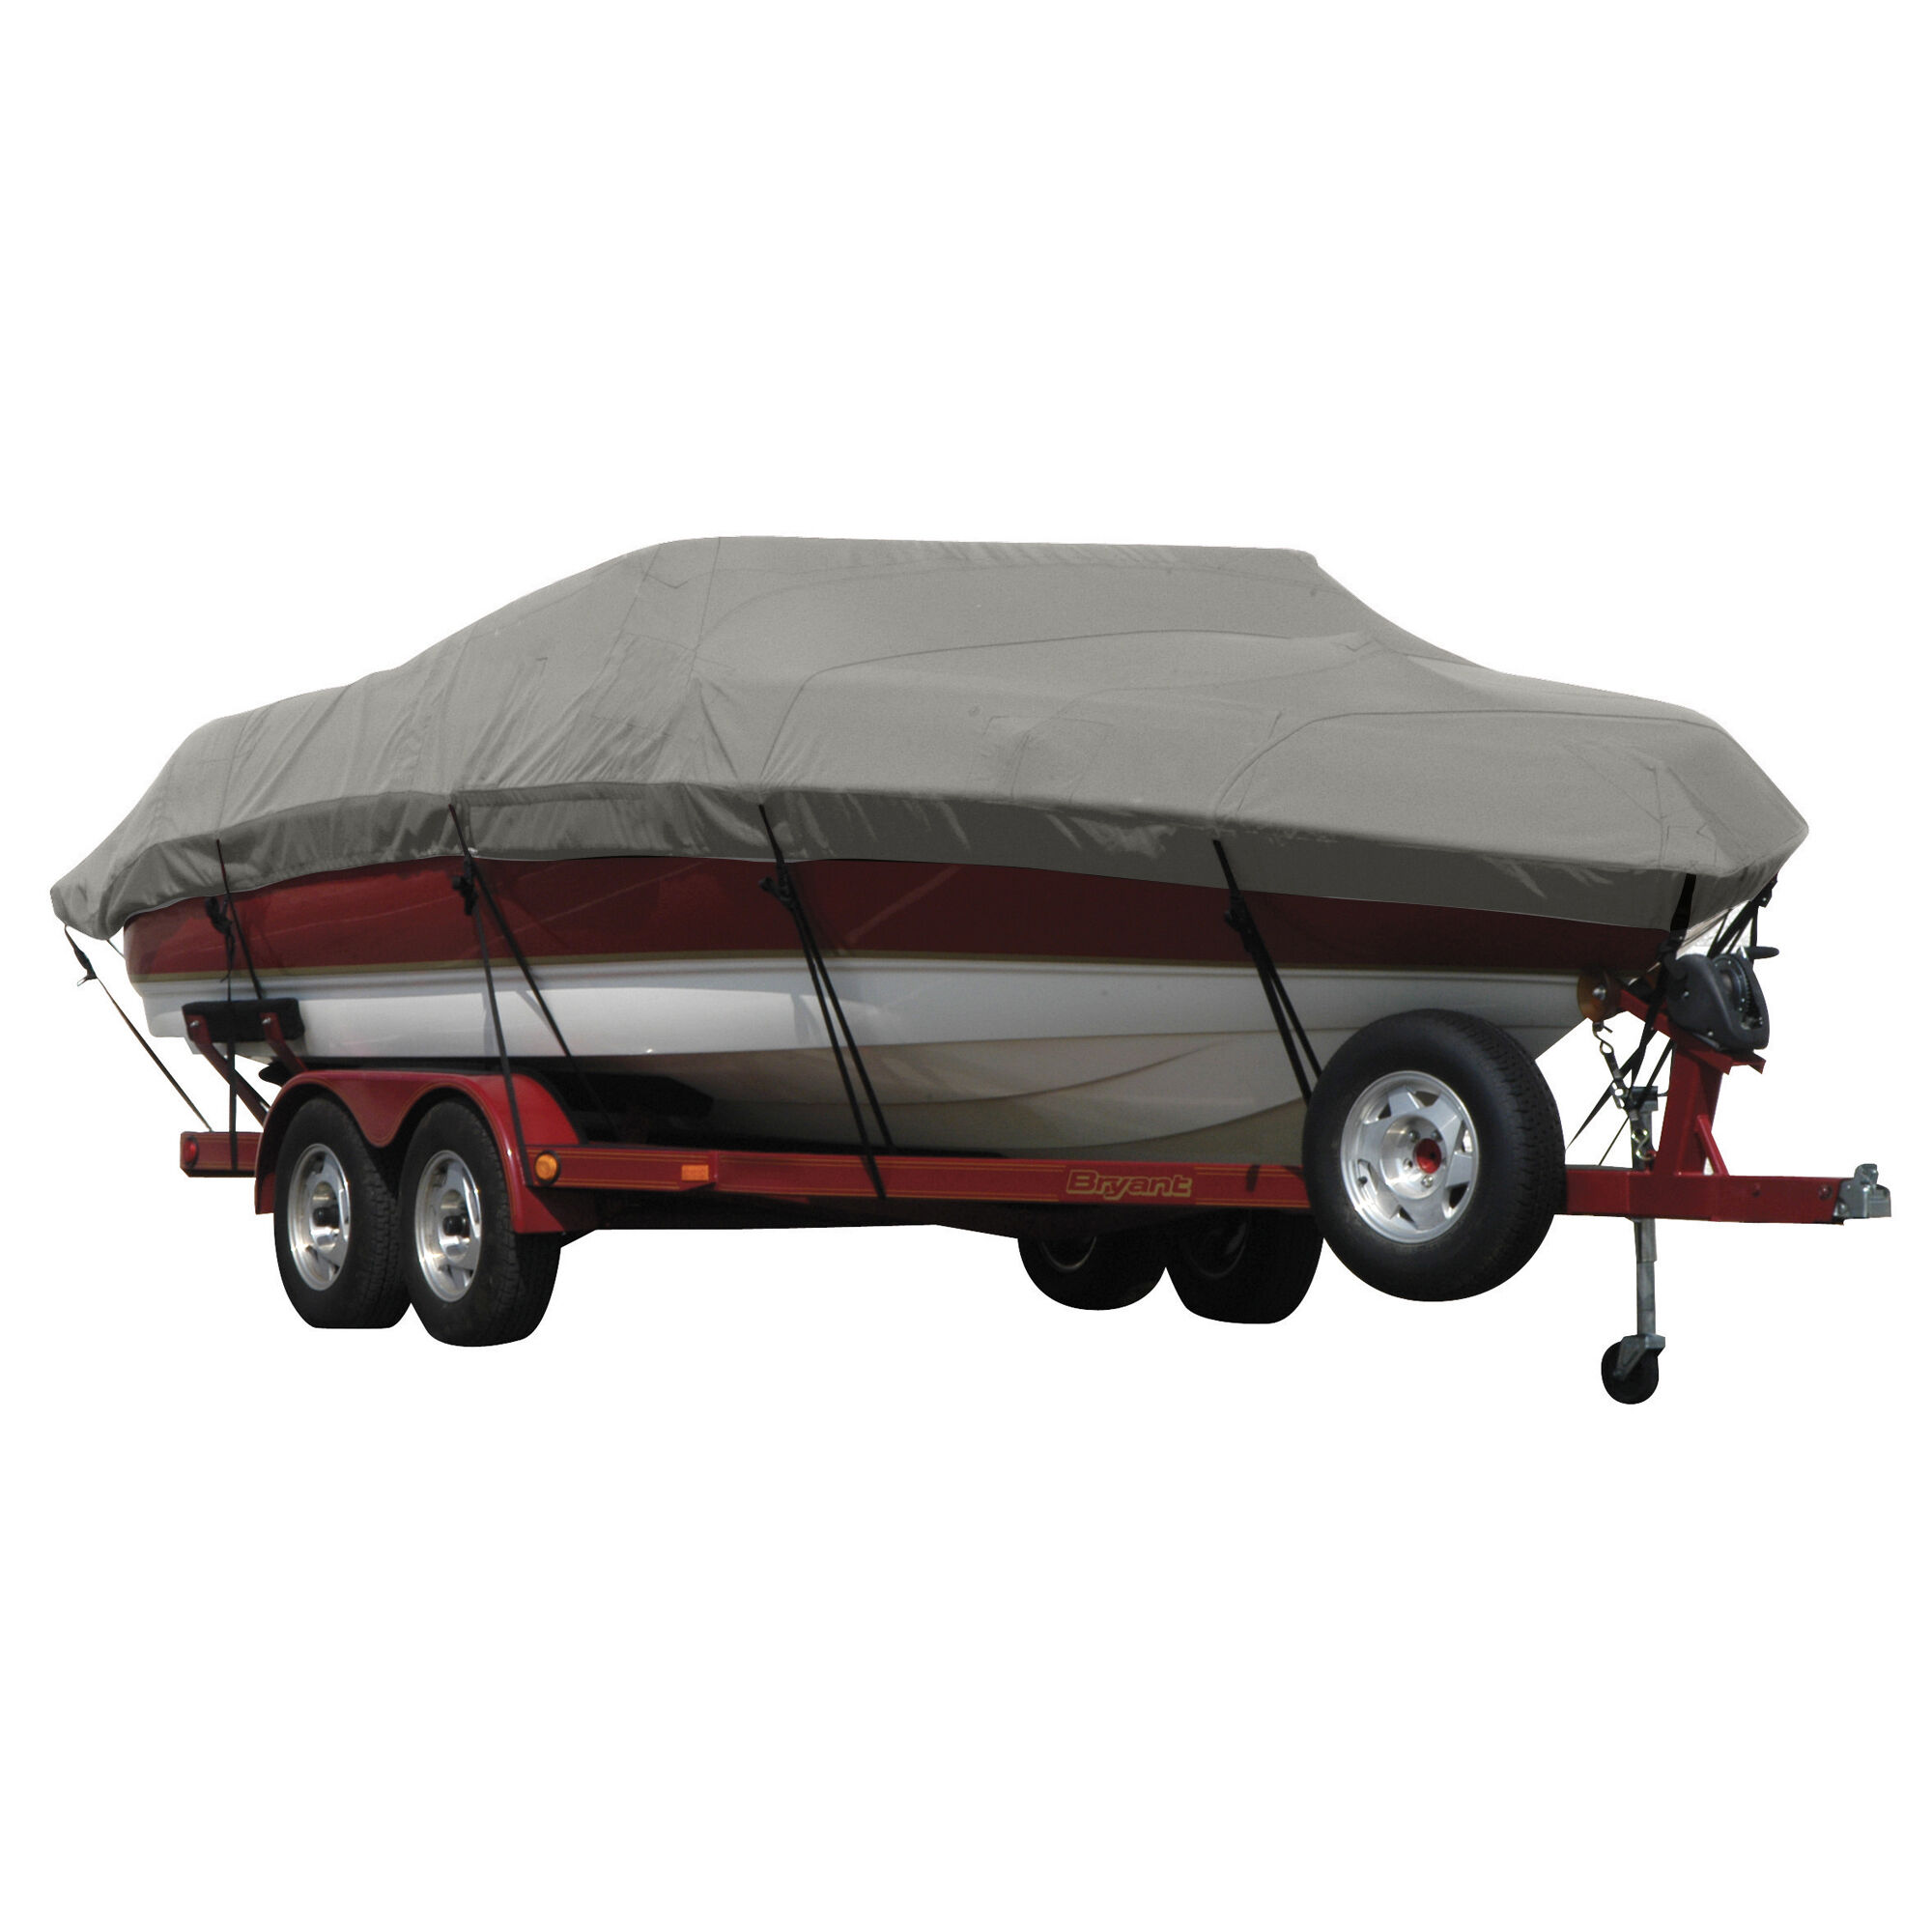 Covermate Exact Fit Sunbrella Boat Cover for Sea Doo Challenger 180 Challenger 180 Jet Drive. Charcoal Grey Heather in Charcoal Grey Heather